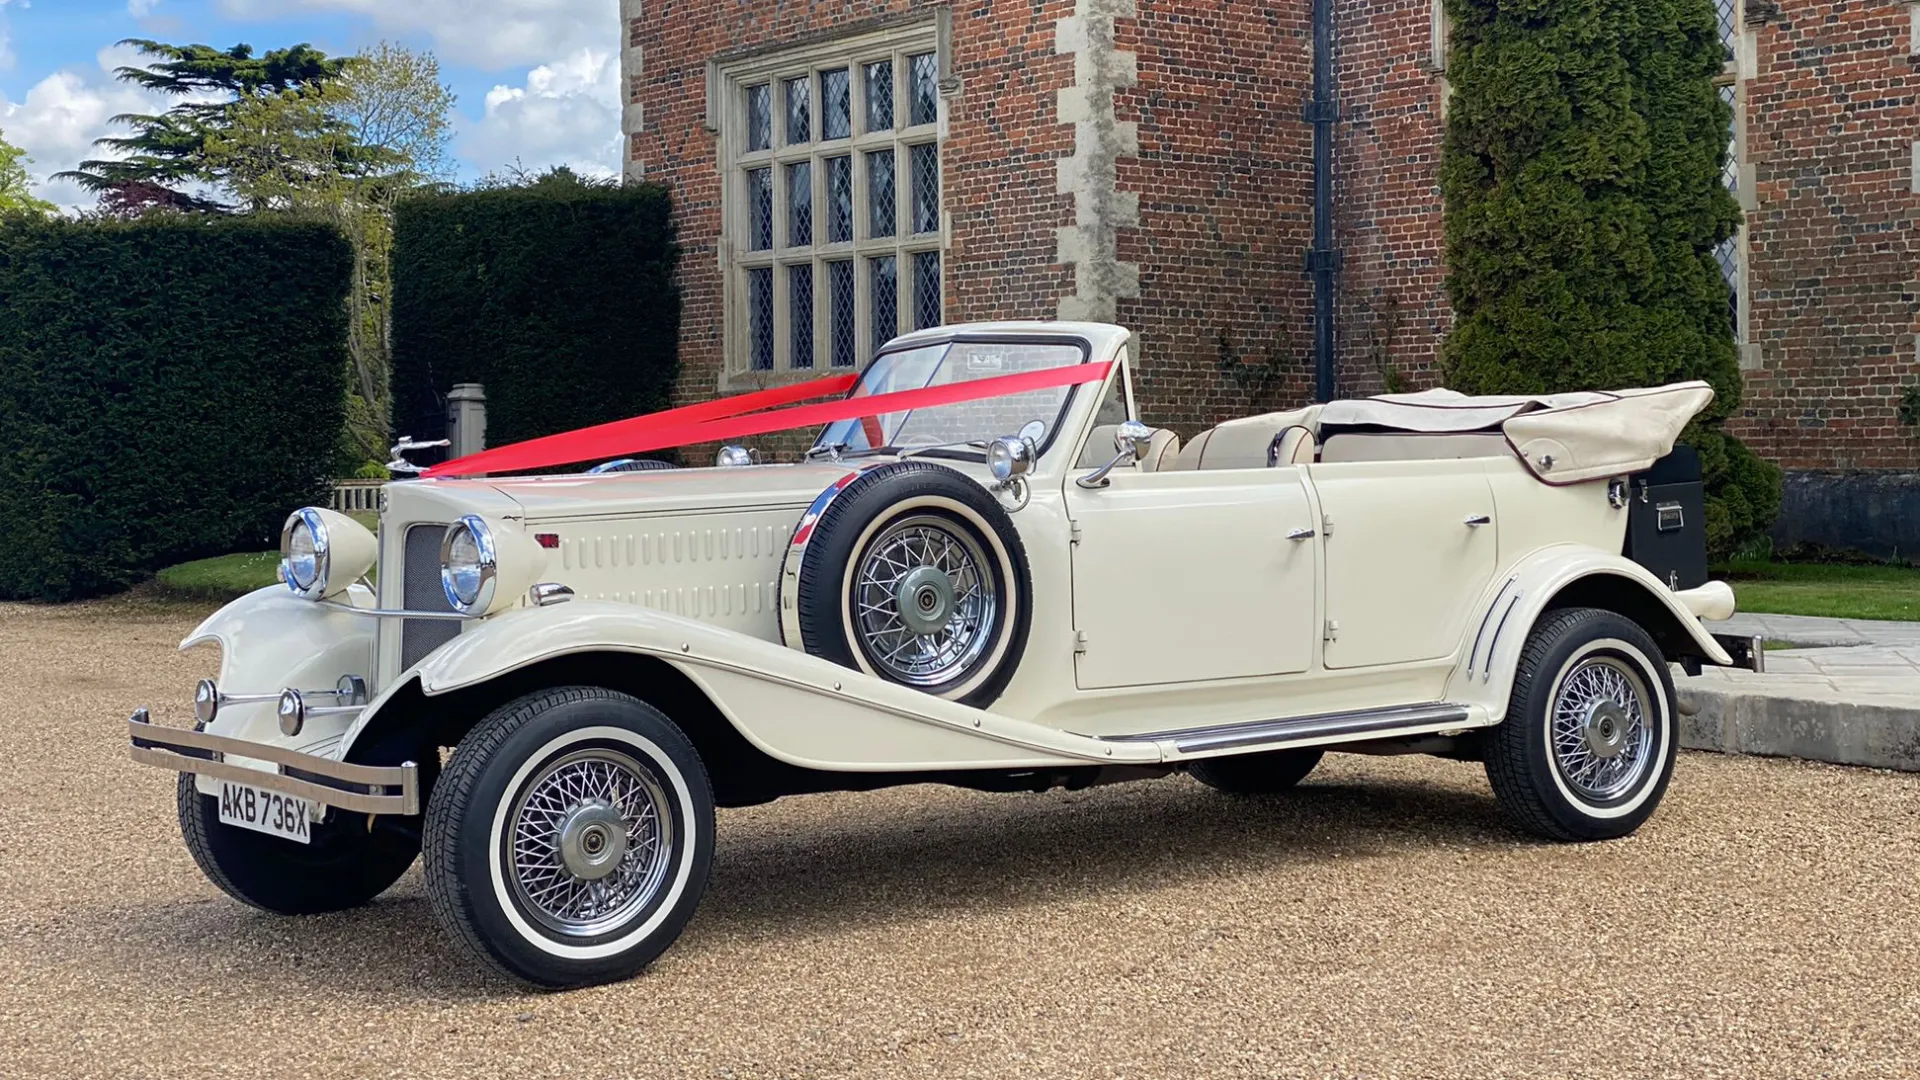 Ivory Convertible Beauford in front of a wedding venue decorated with traditional "V-Shape" ribbons in Red accross its bonnet